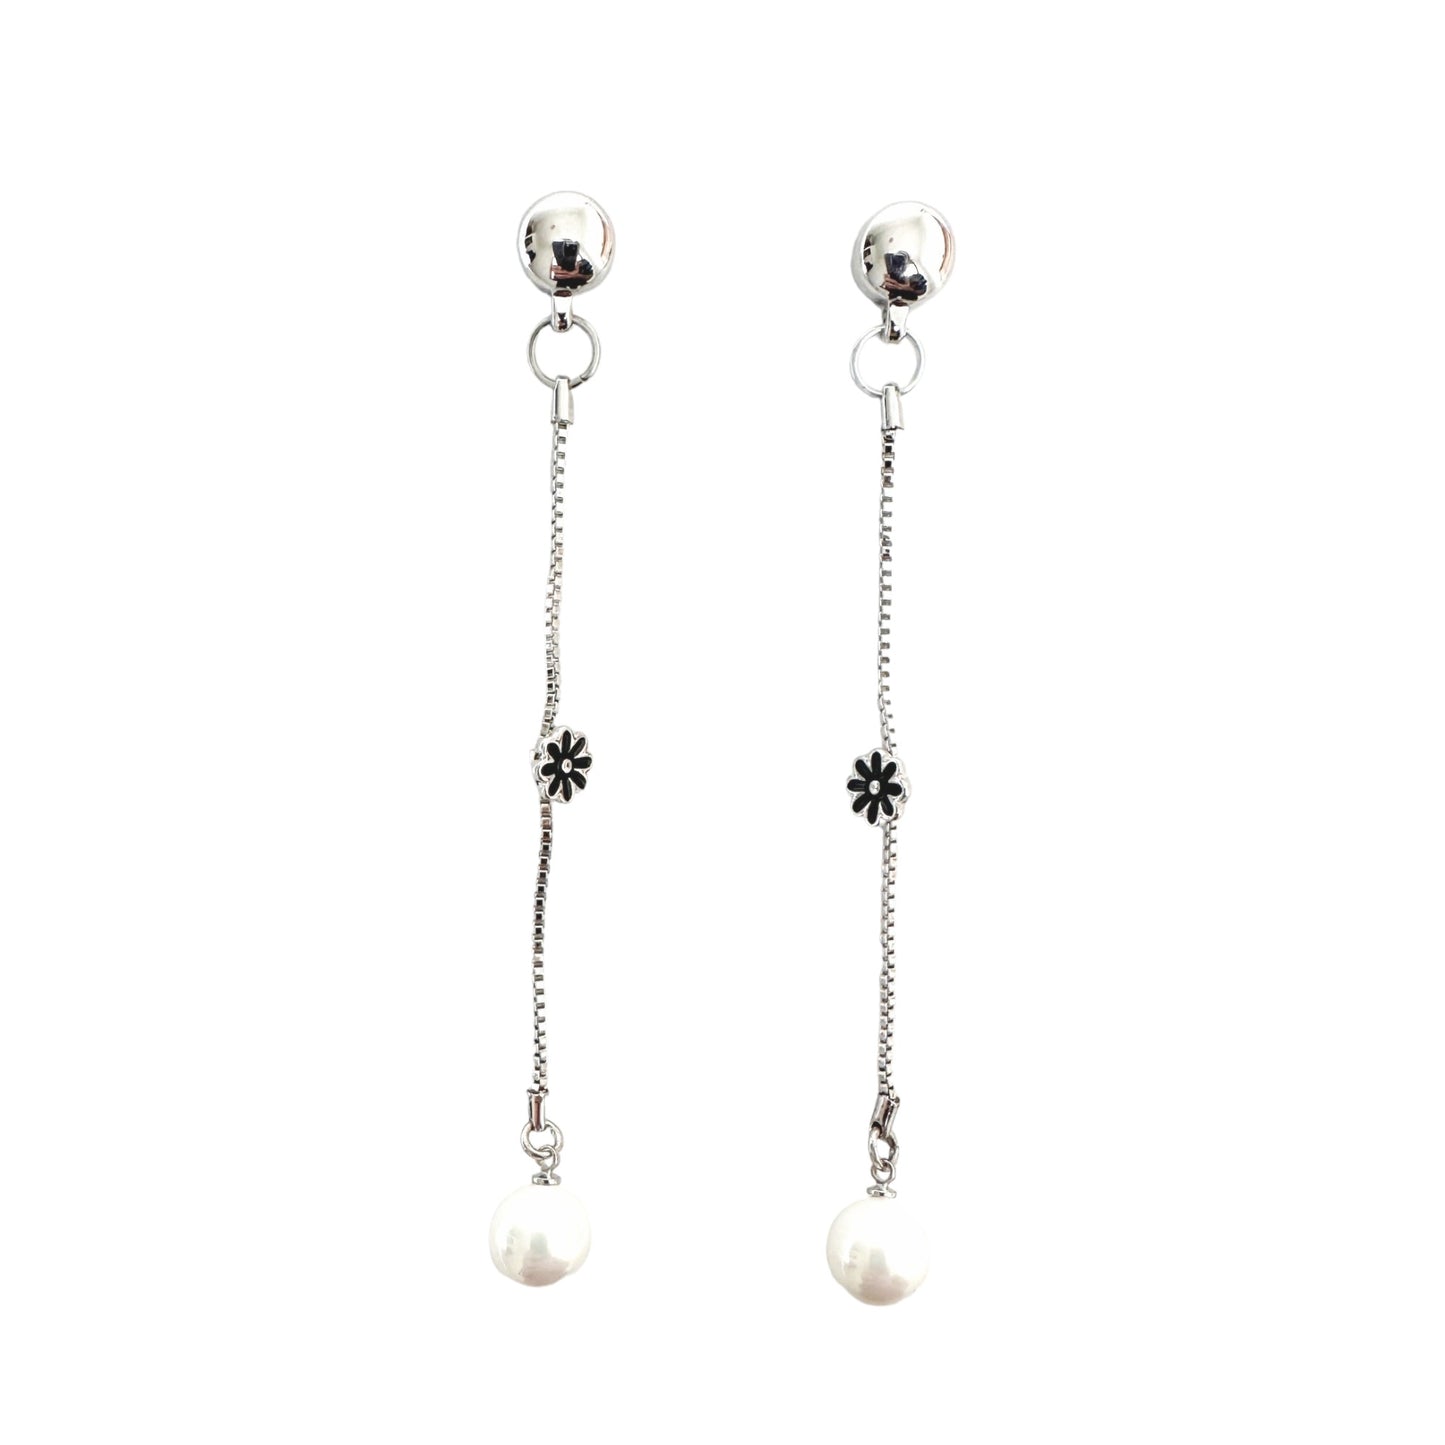 TI-GO Daisy and Pearl earrings. Magnetic titanium interchangeable earring system. Detachable earrings for a truly hypoallergenic jewellery on a white background